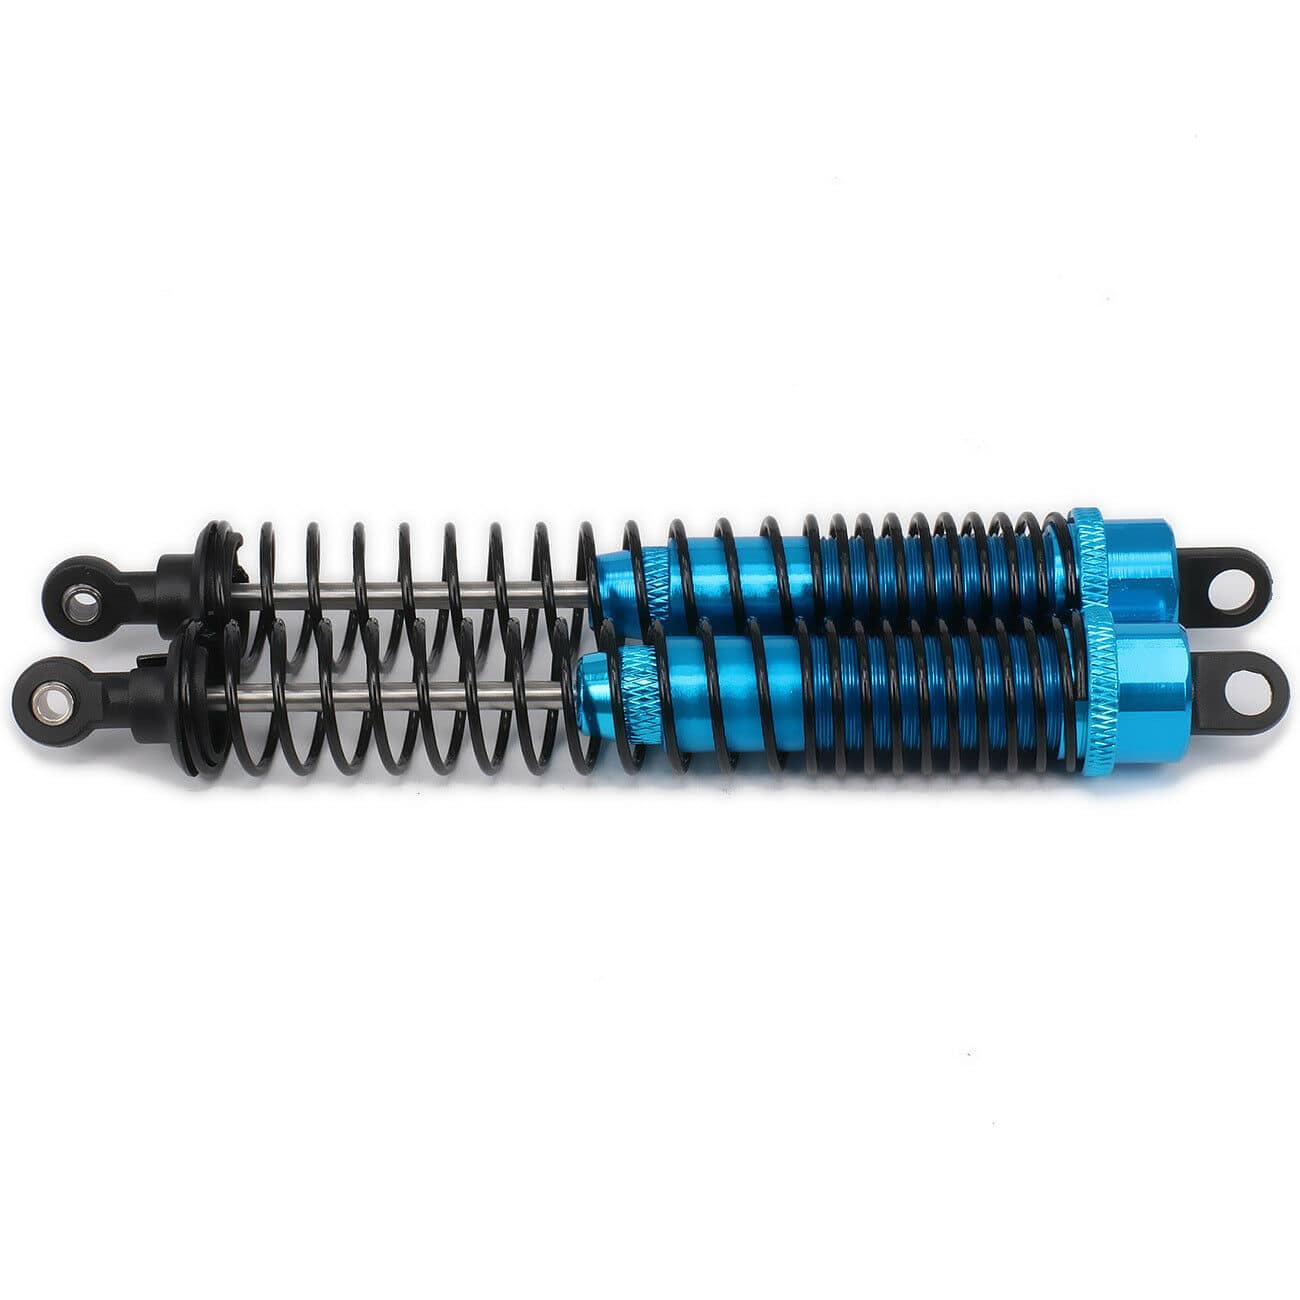 RCAWD RC CAR UPGRADE PARTS Blue RCAWD Adjustable 130mm RC Shock Absorber Damper For RC Car 1/10 Model Car 2PCS